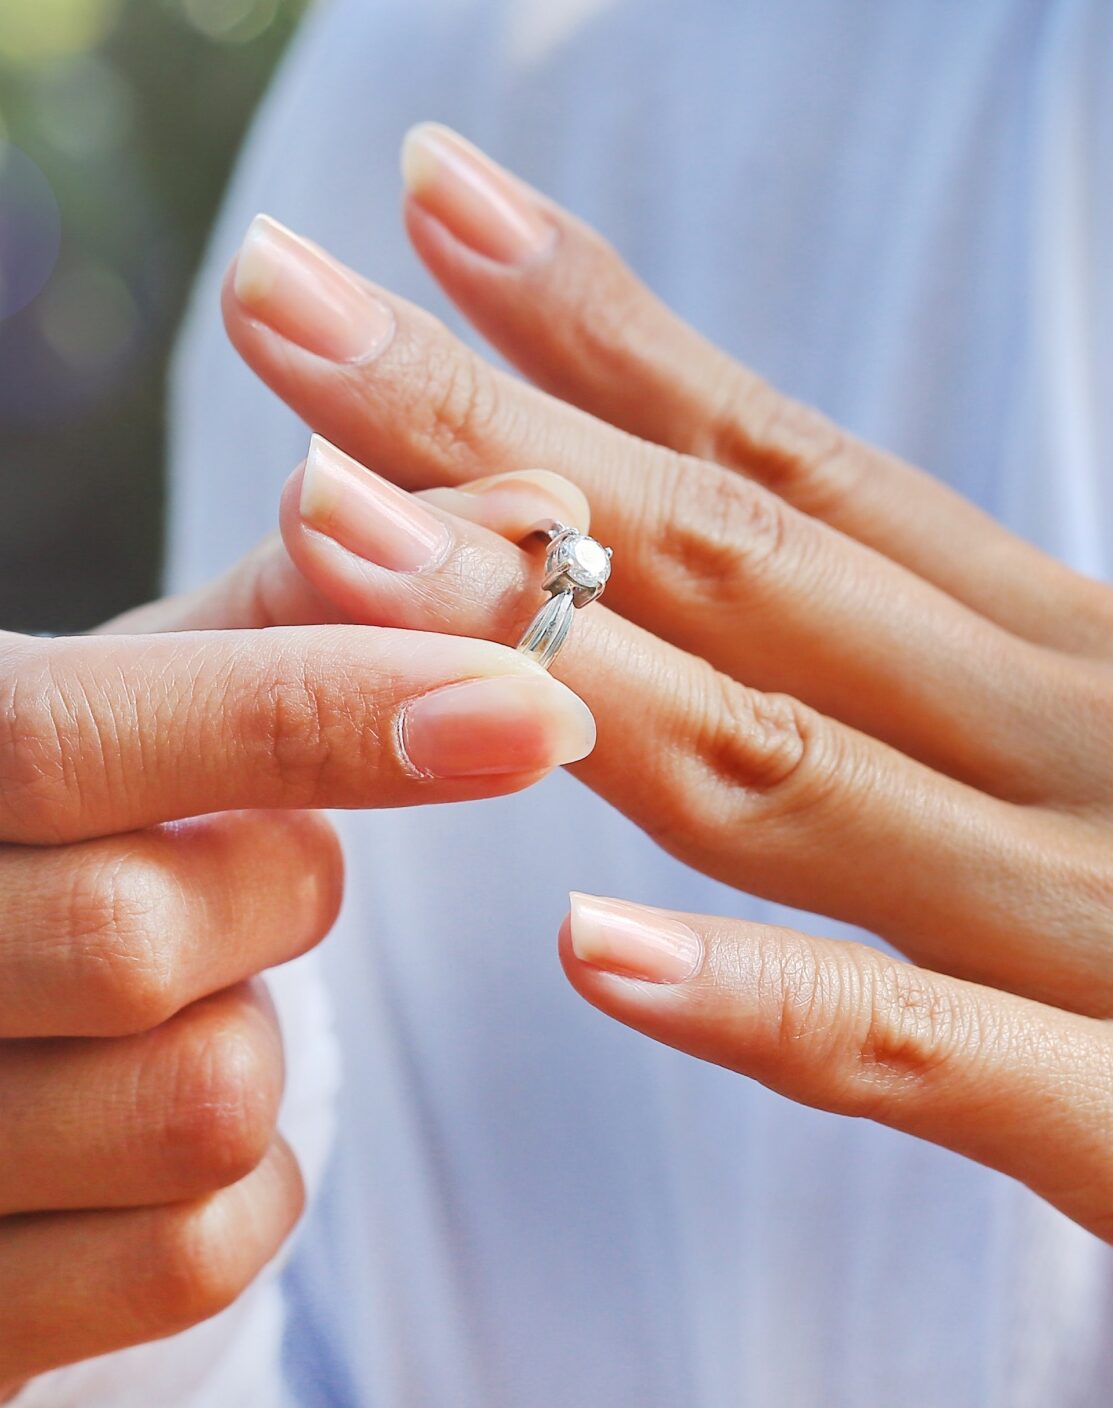 Woman removing wedding ring from her finger.